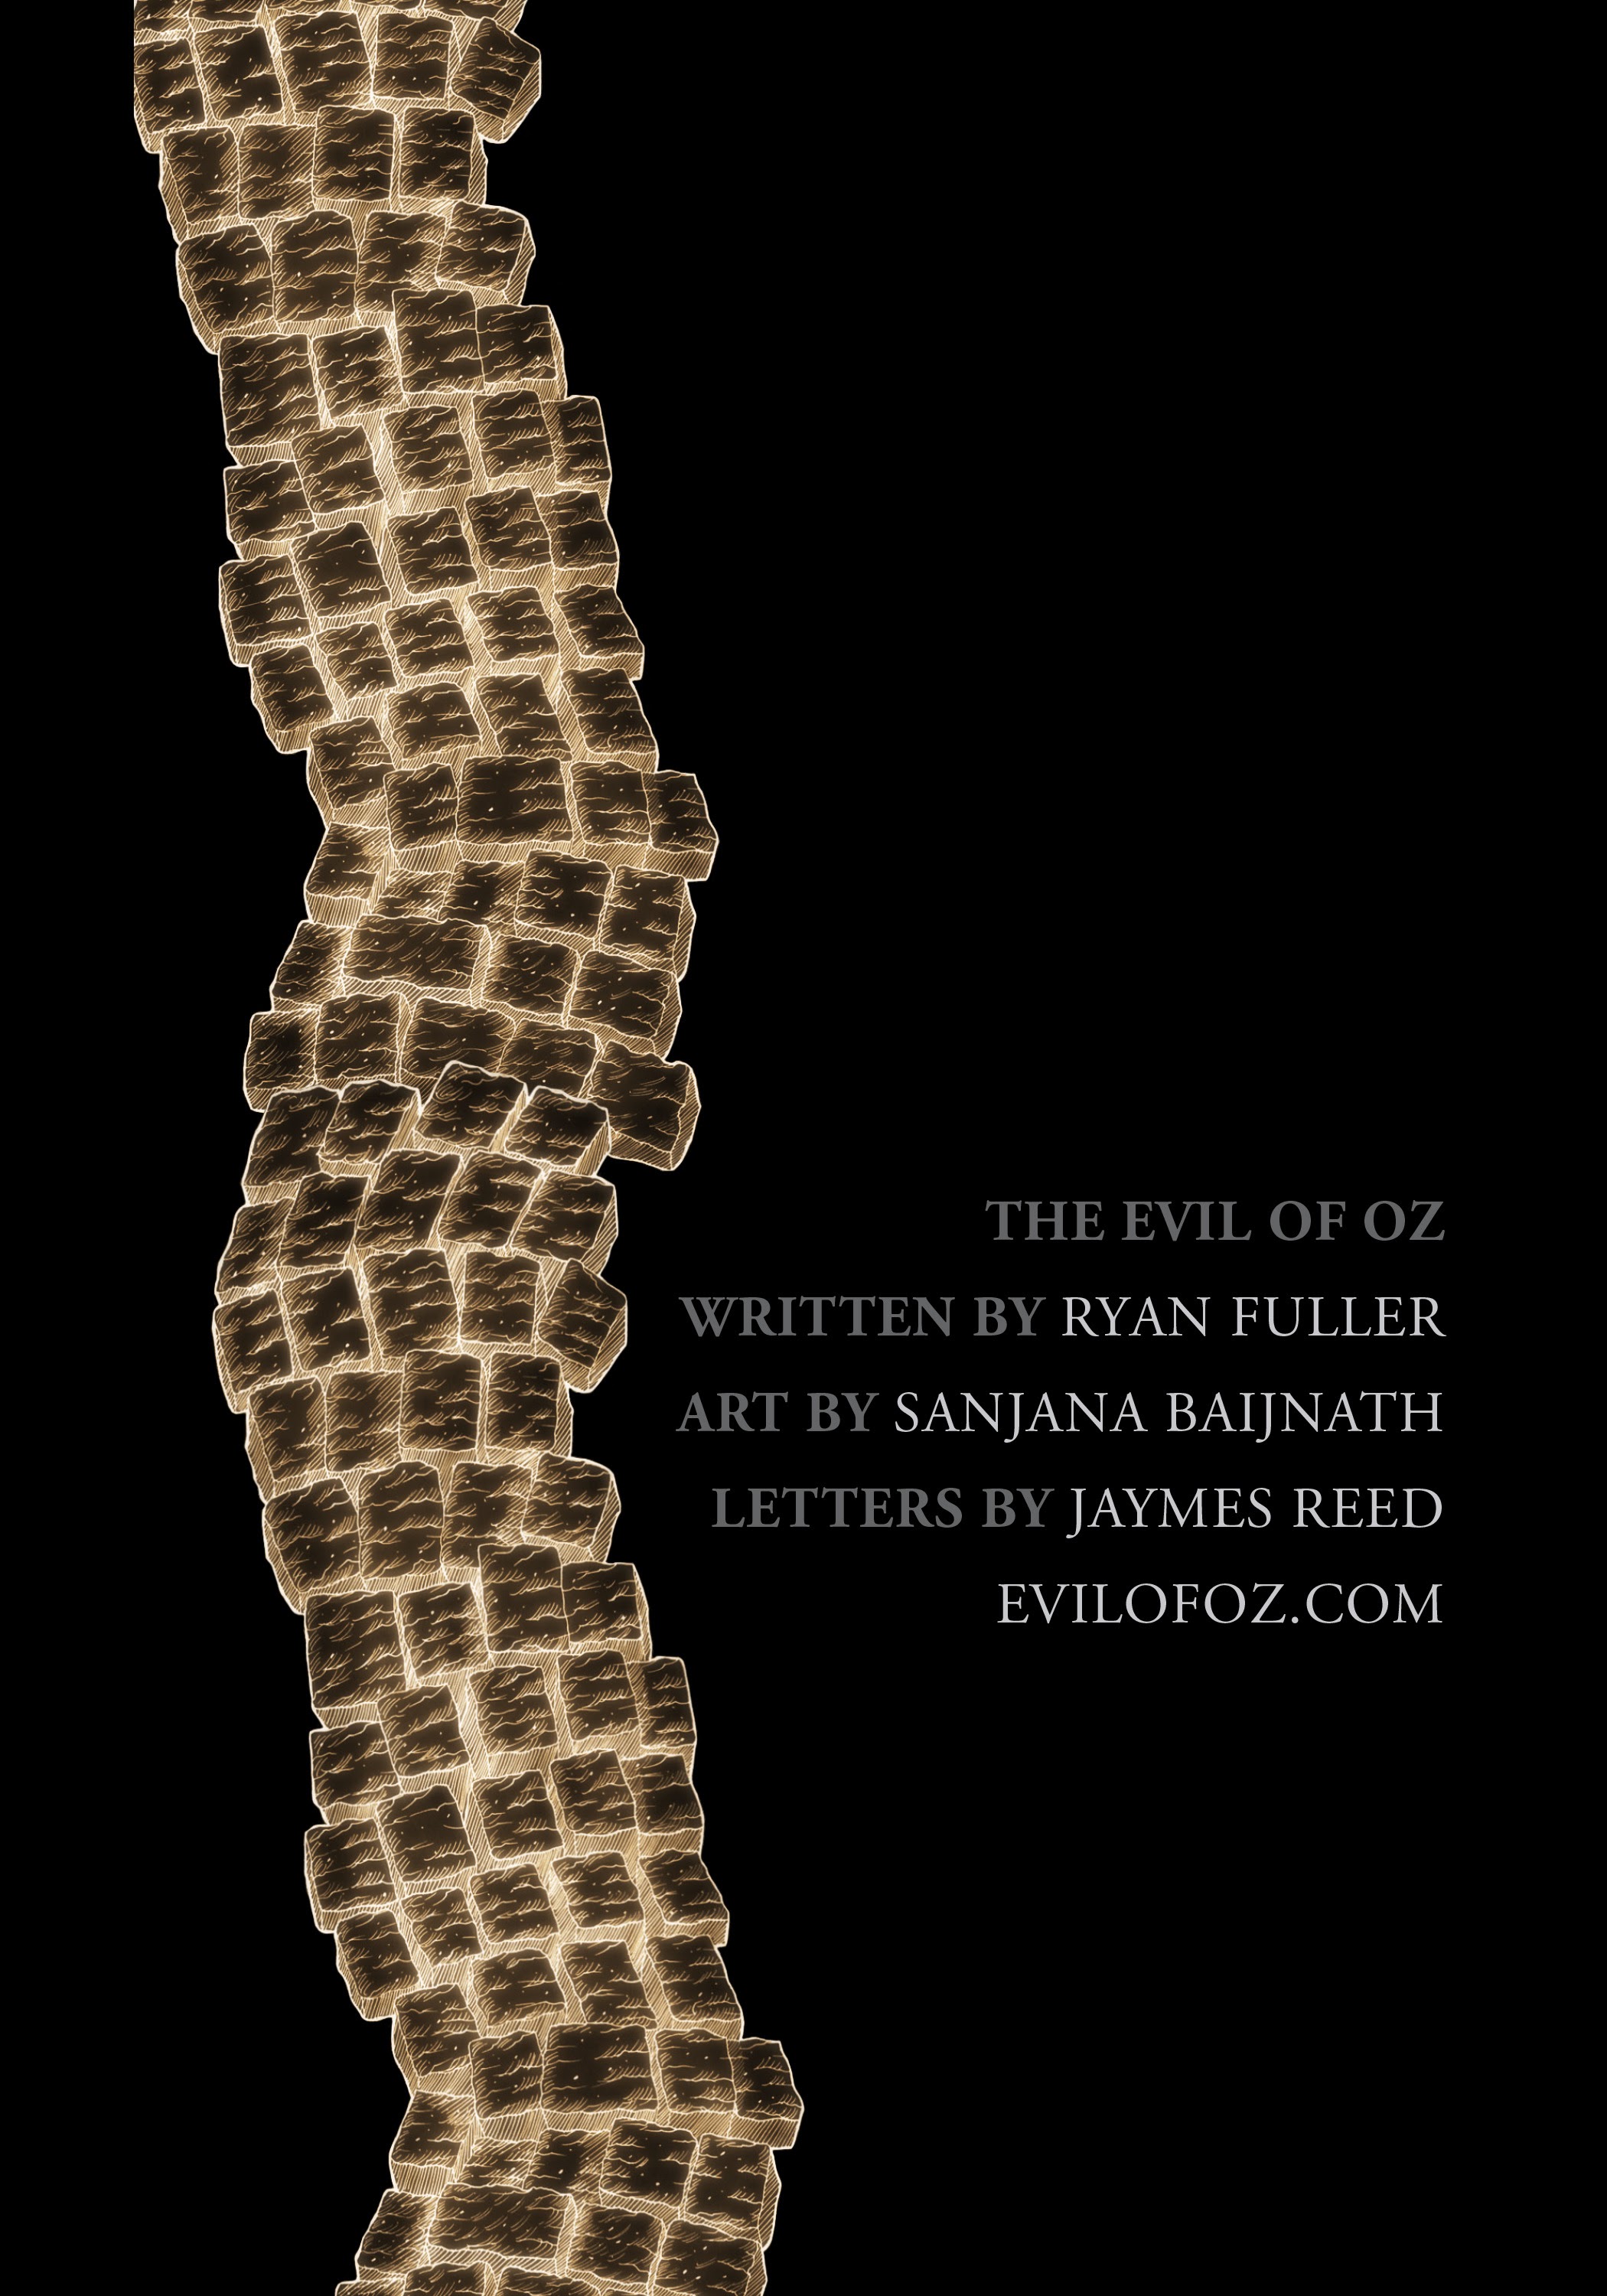 Read online The Evil of Oz comic -  Issue # TPB - 2